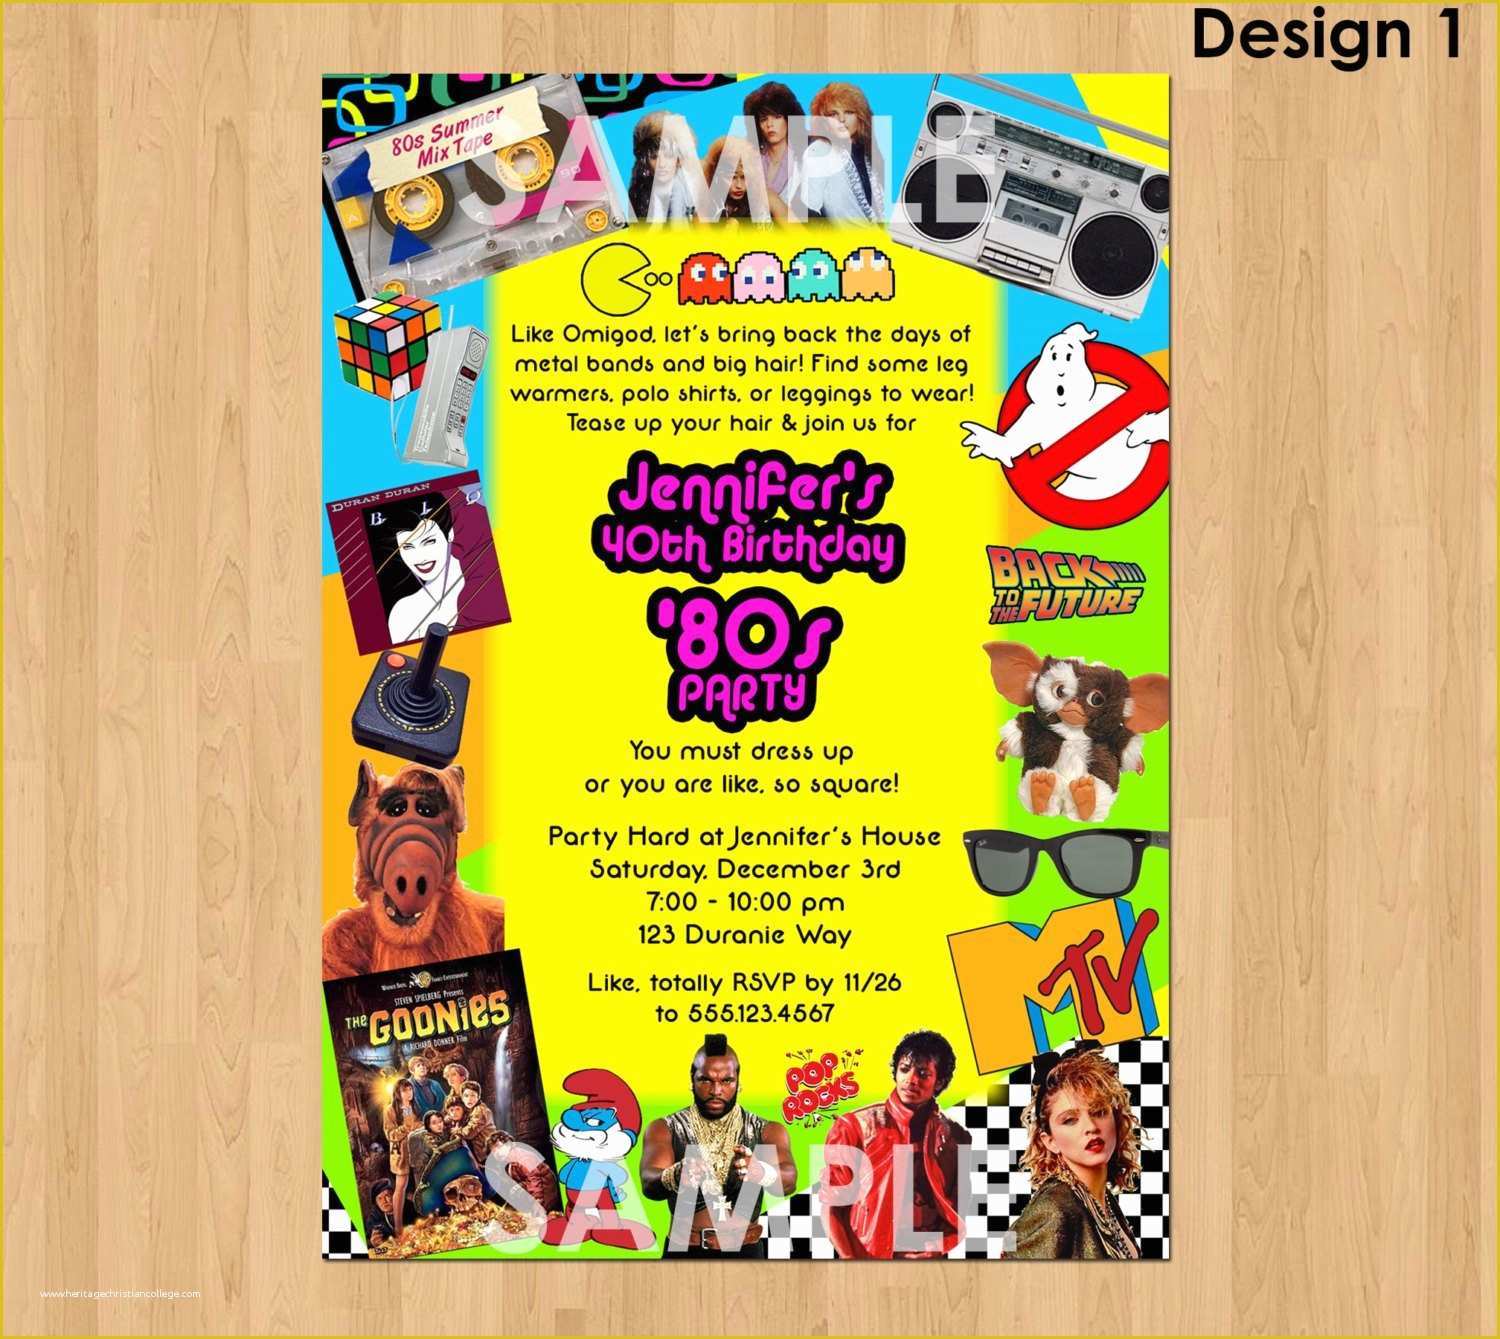 80s Party Invitations Template Free Of 80s Party Invitation 80s Birthday Invitation Printable 40th